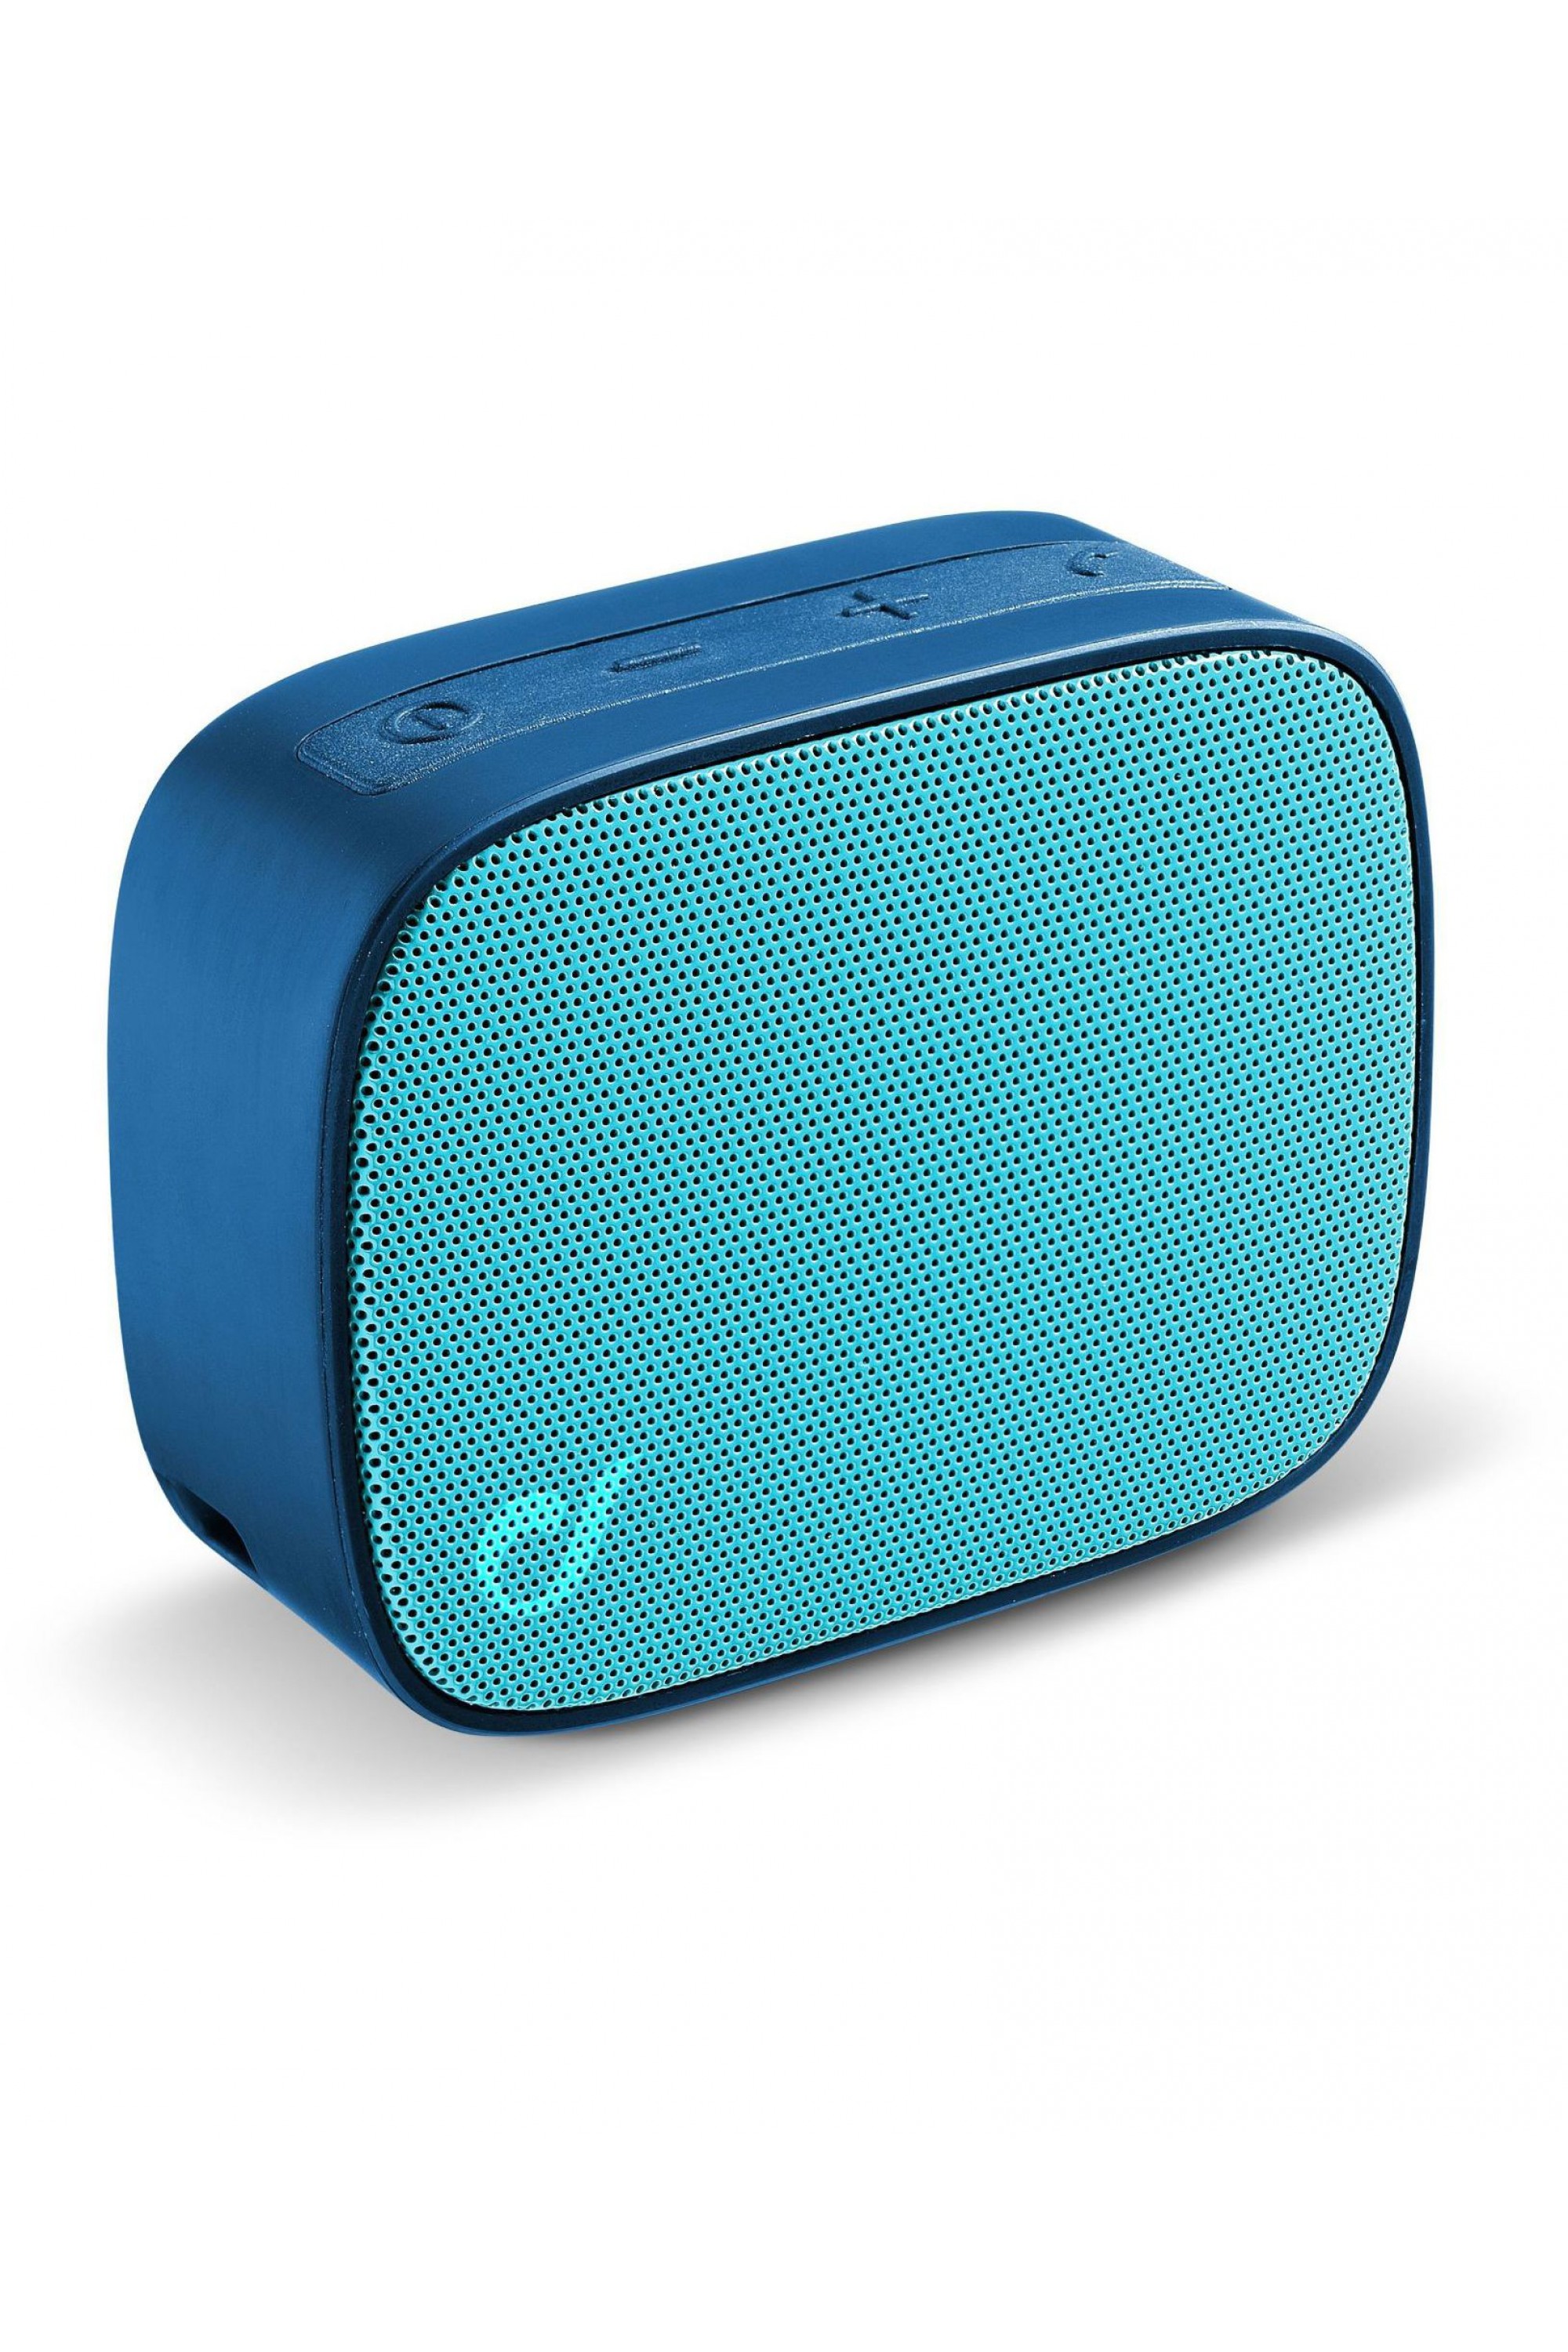 Cellularline Fizzy Turquoise Portable Speakers | Bluetooth